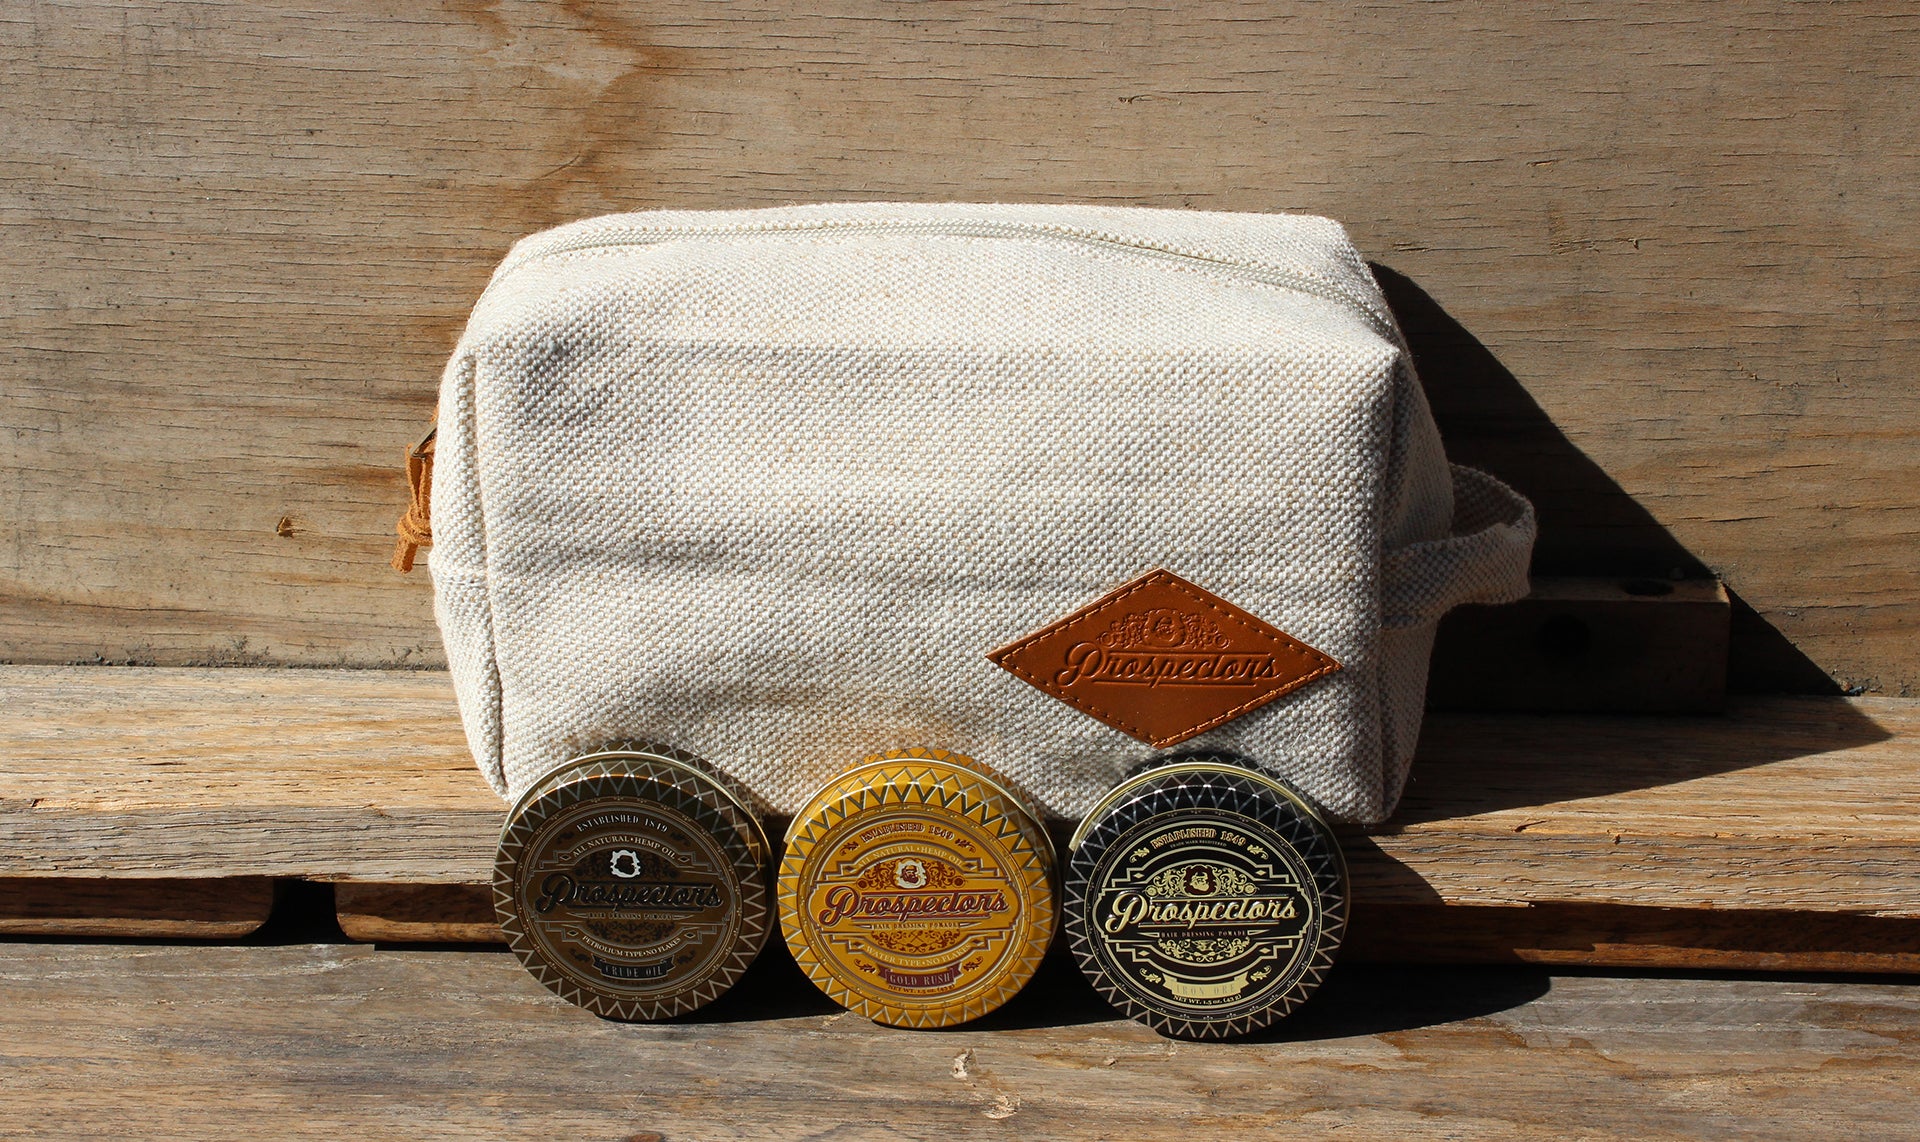 Prospectors Pomade and Toiletry Giveaway